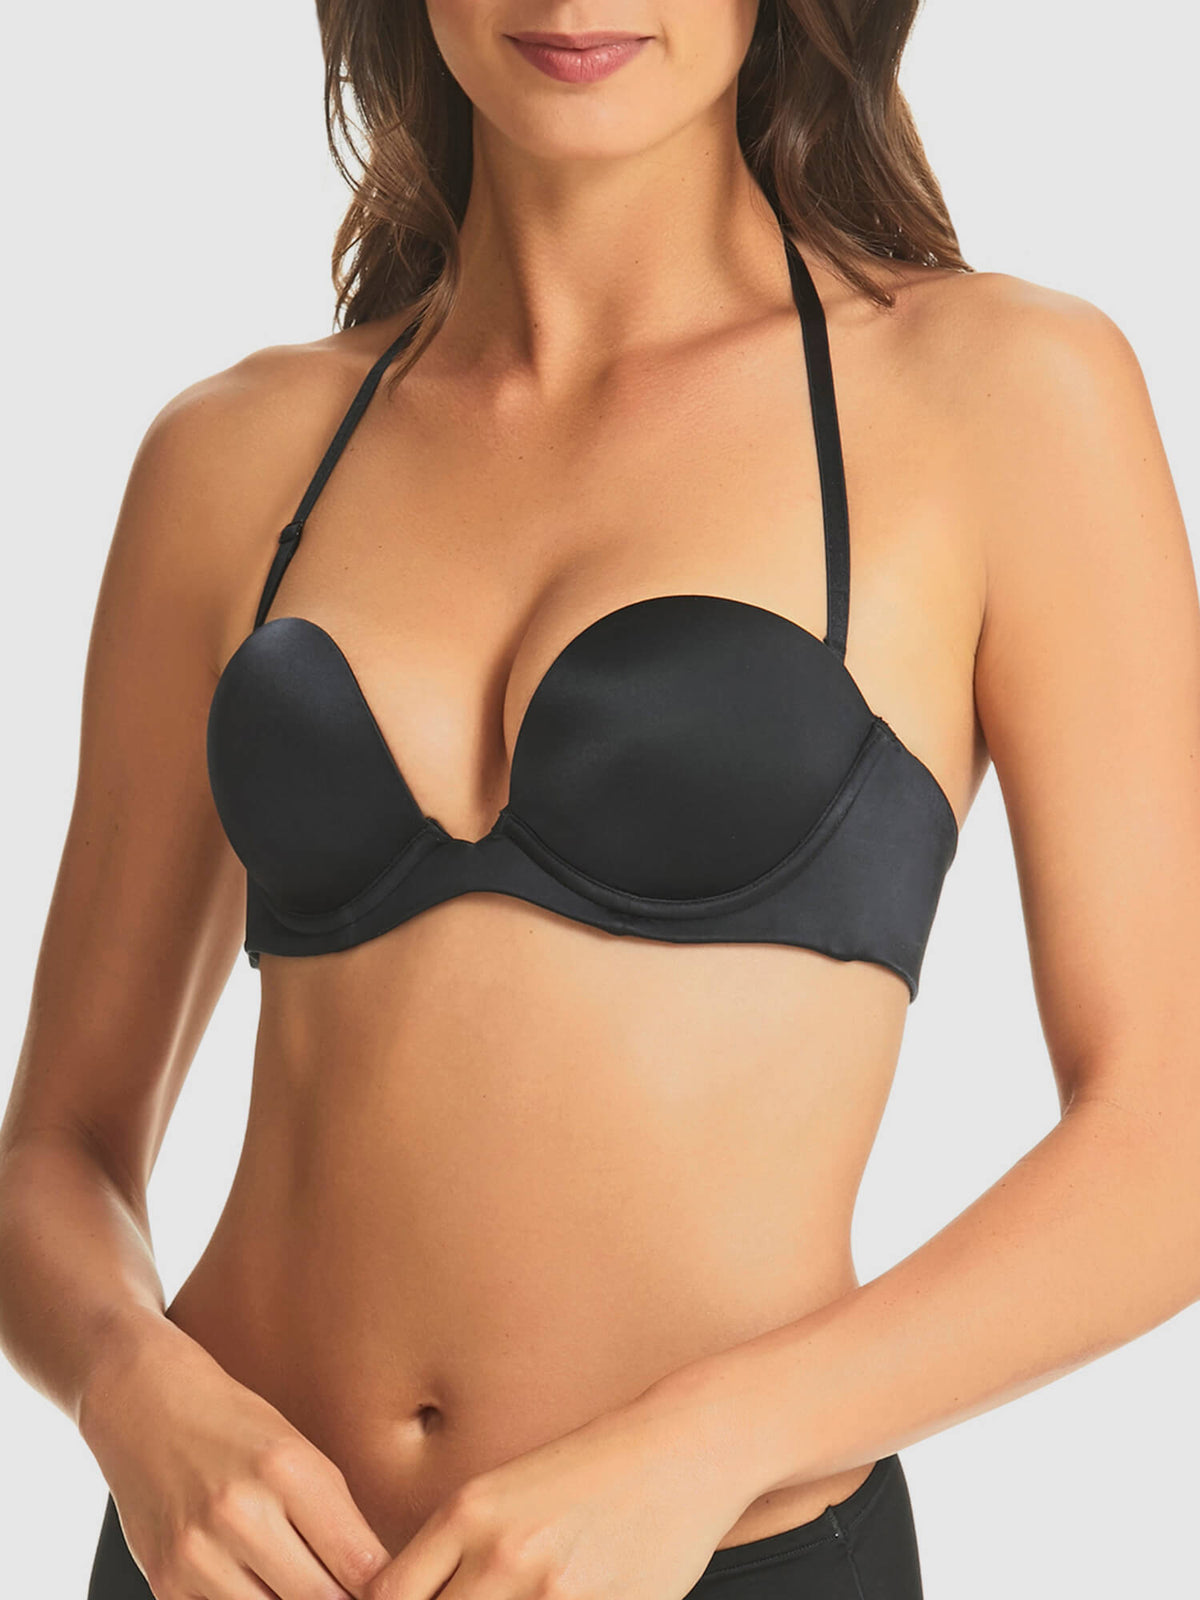 Maidenform Women's Love The Lift Push-up and in Strapless Bra